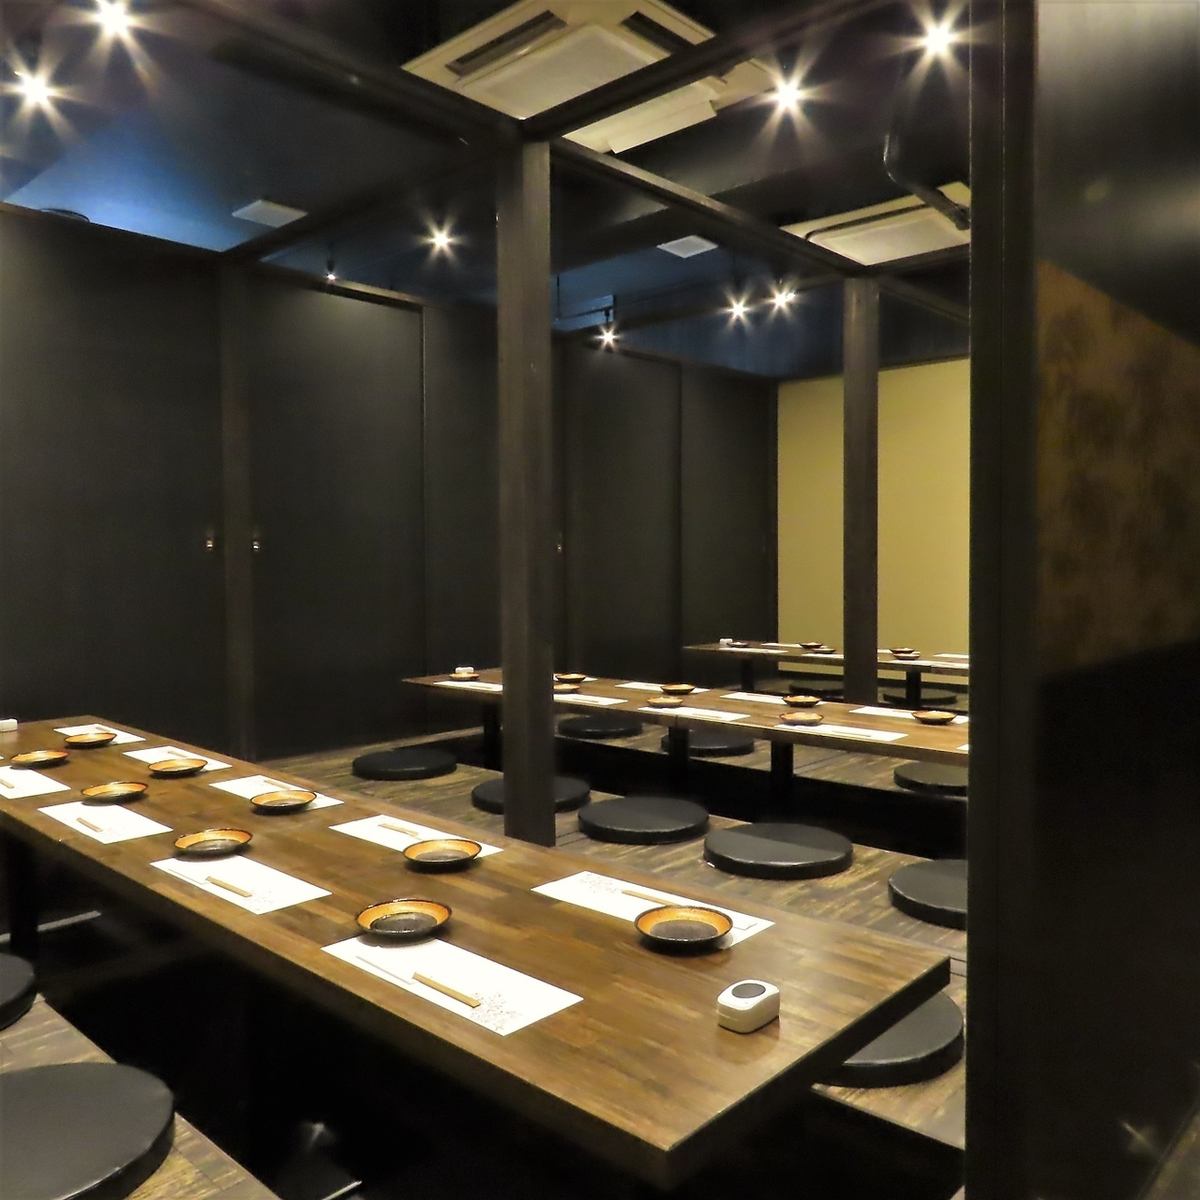 Fully equipped with private rooms that can be reserved for private parties♪ We provide the perfect space for parties!